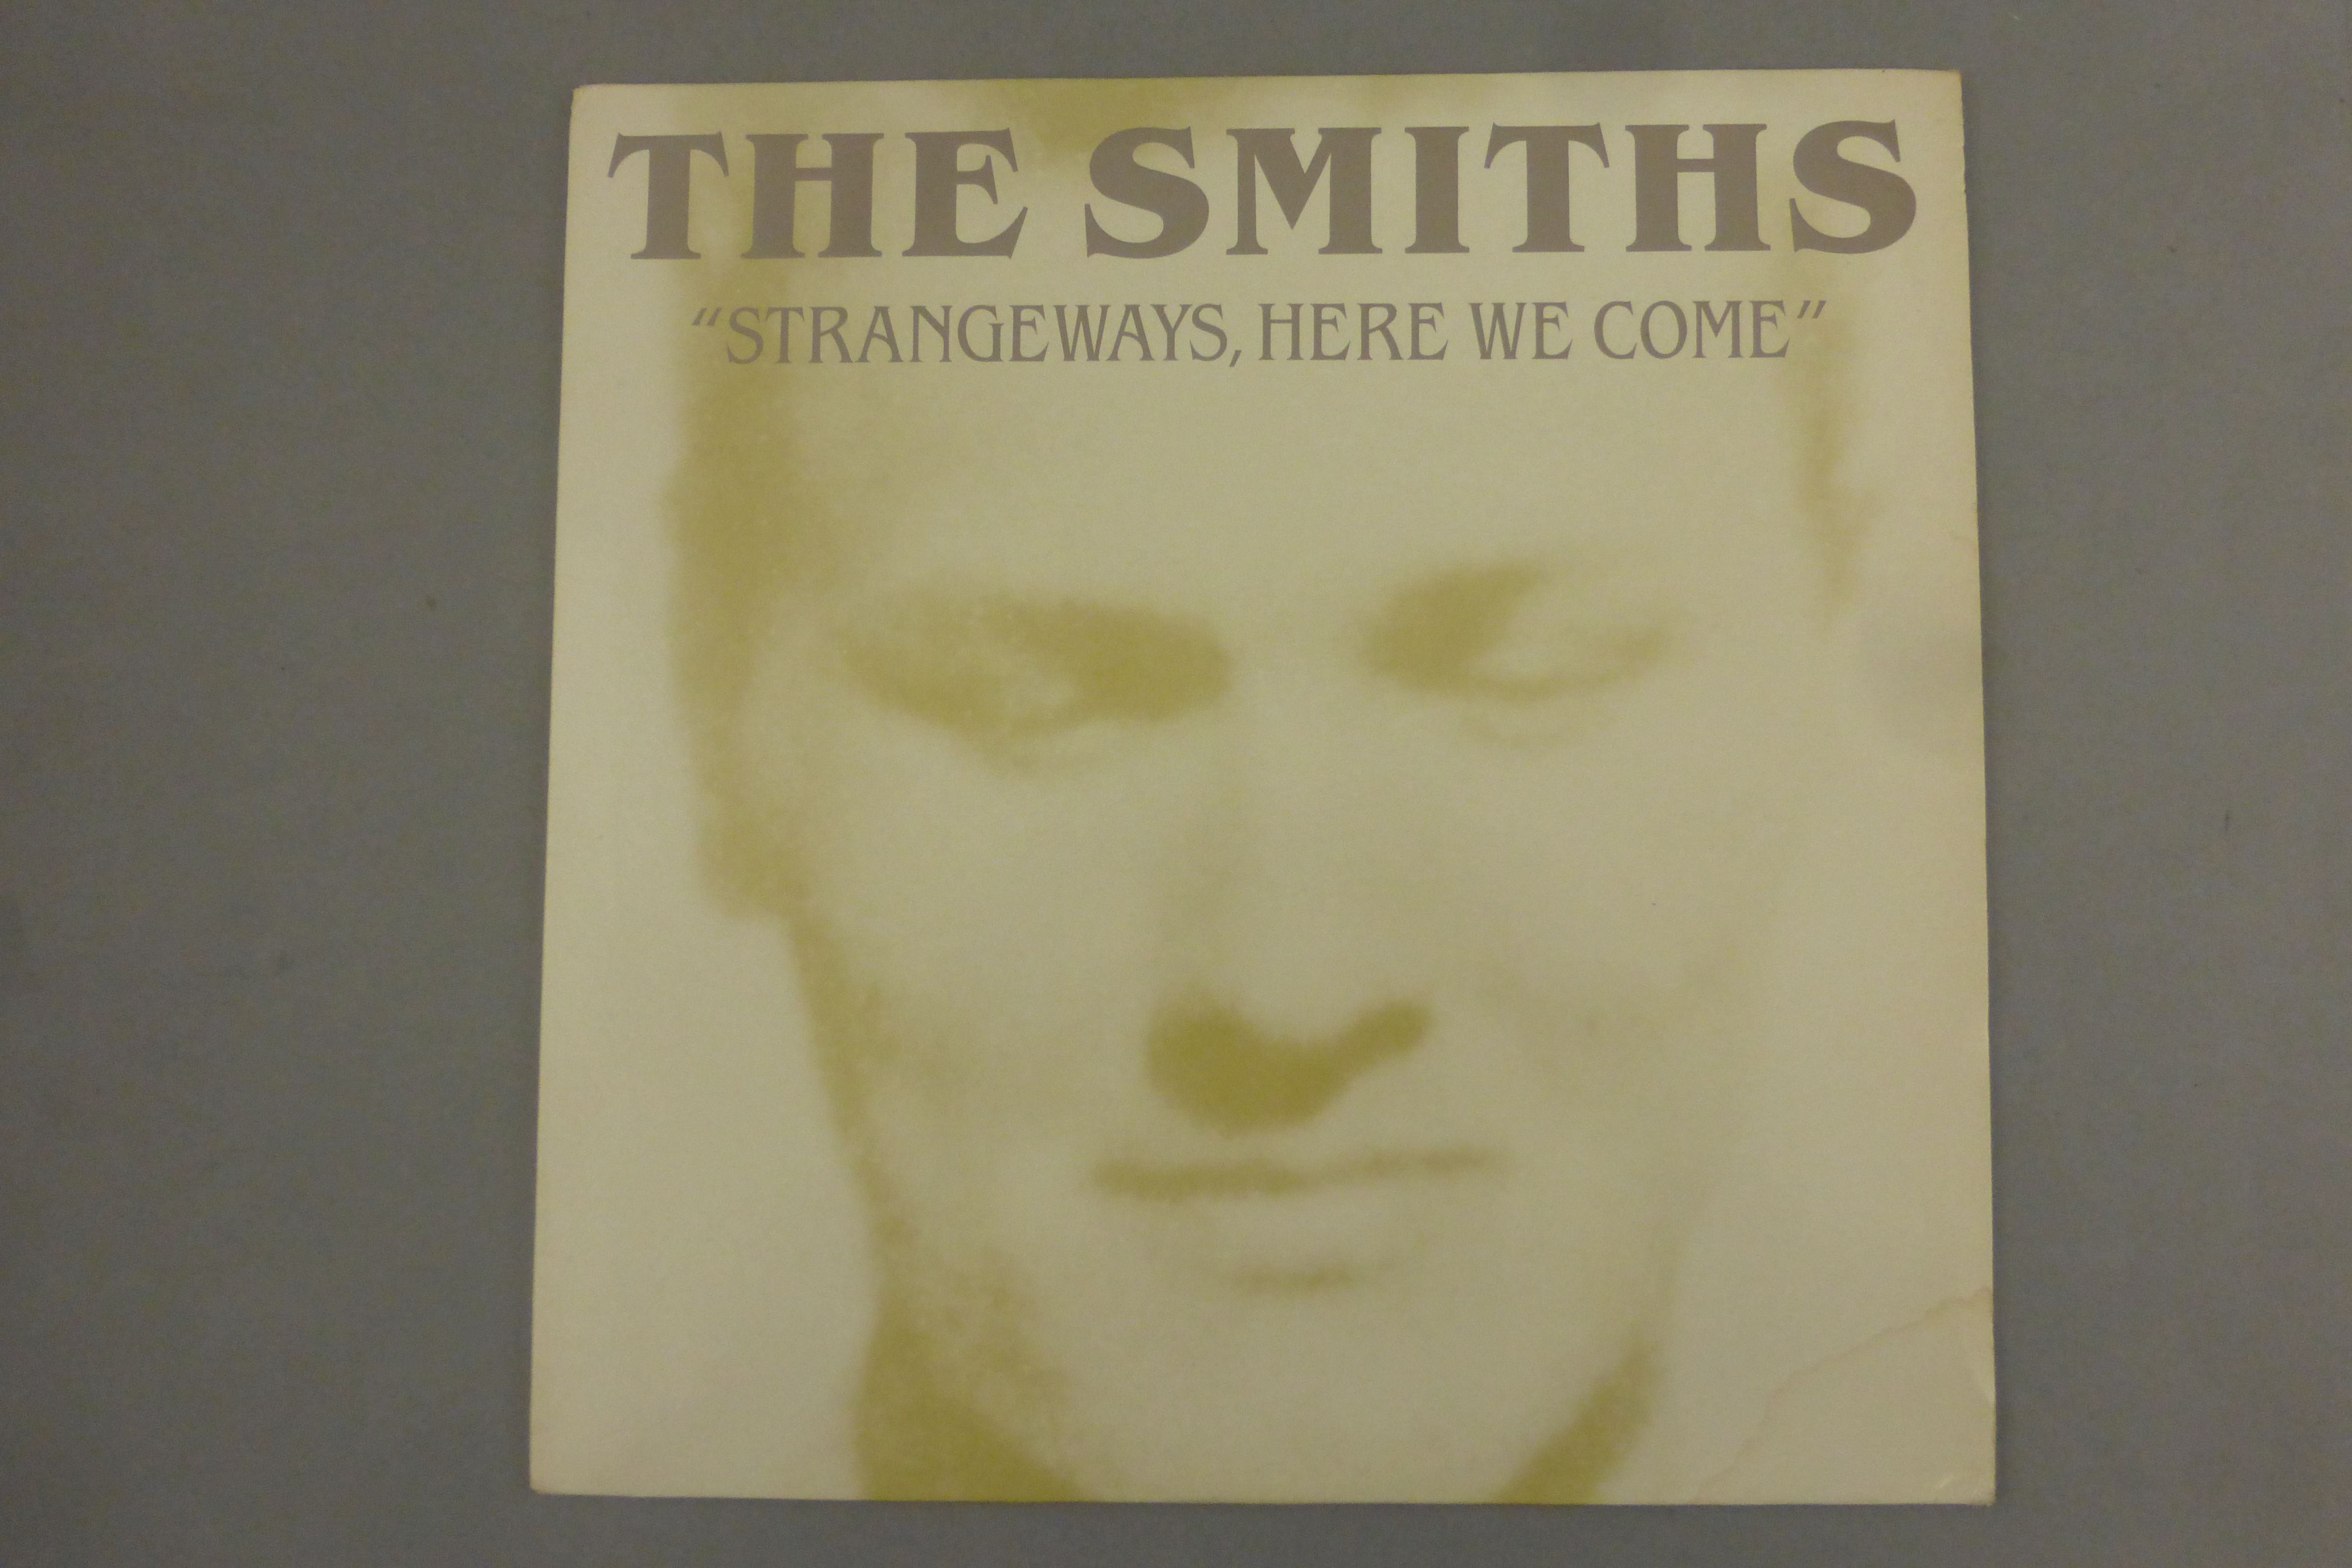 Vinyl - The Smiths - Three LP's to include Hatful Of Hollow (Rough 76), The Smiths (Rough 61), and - Image 3 of 4